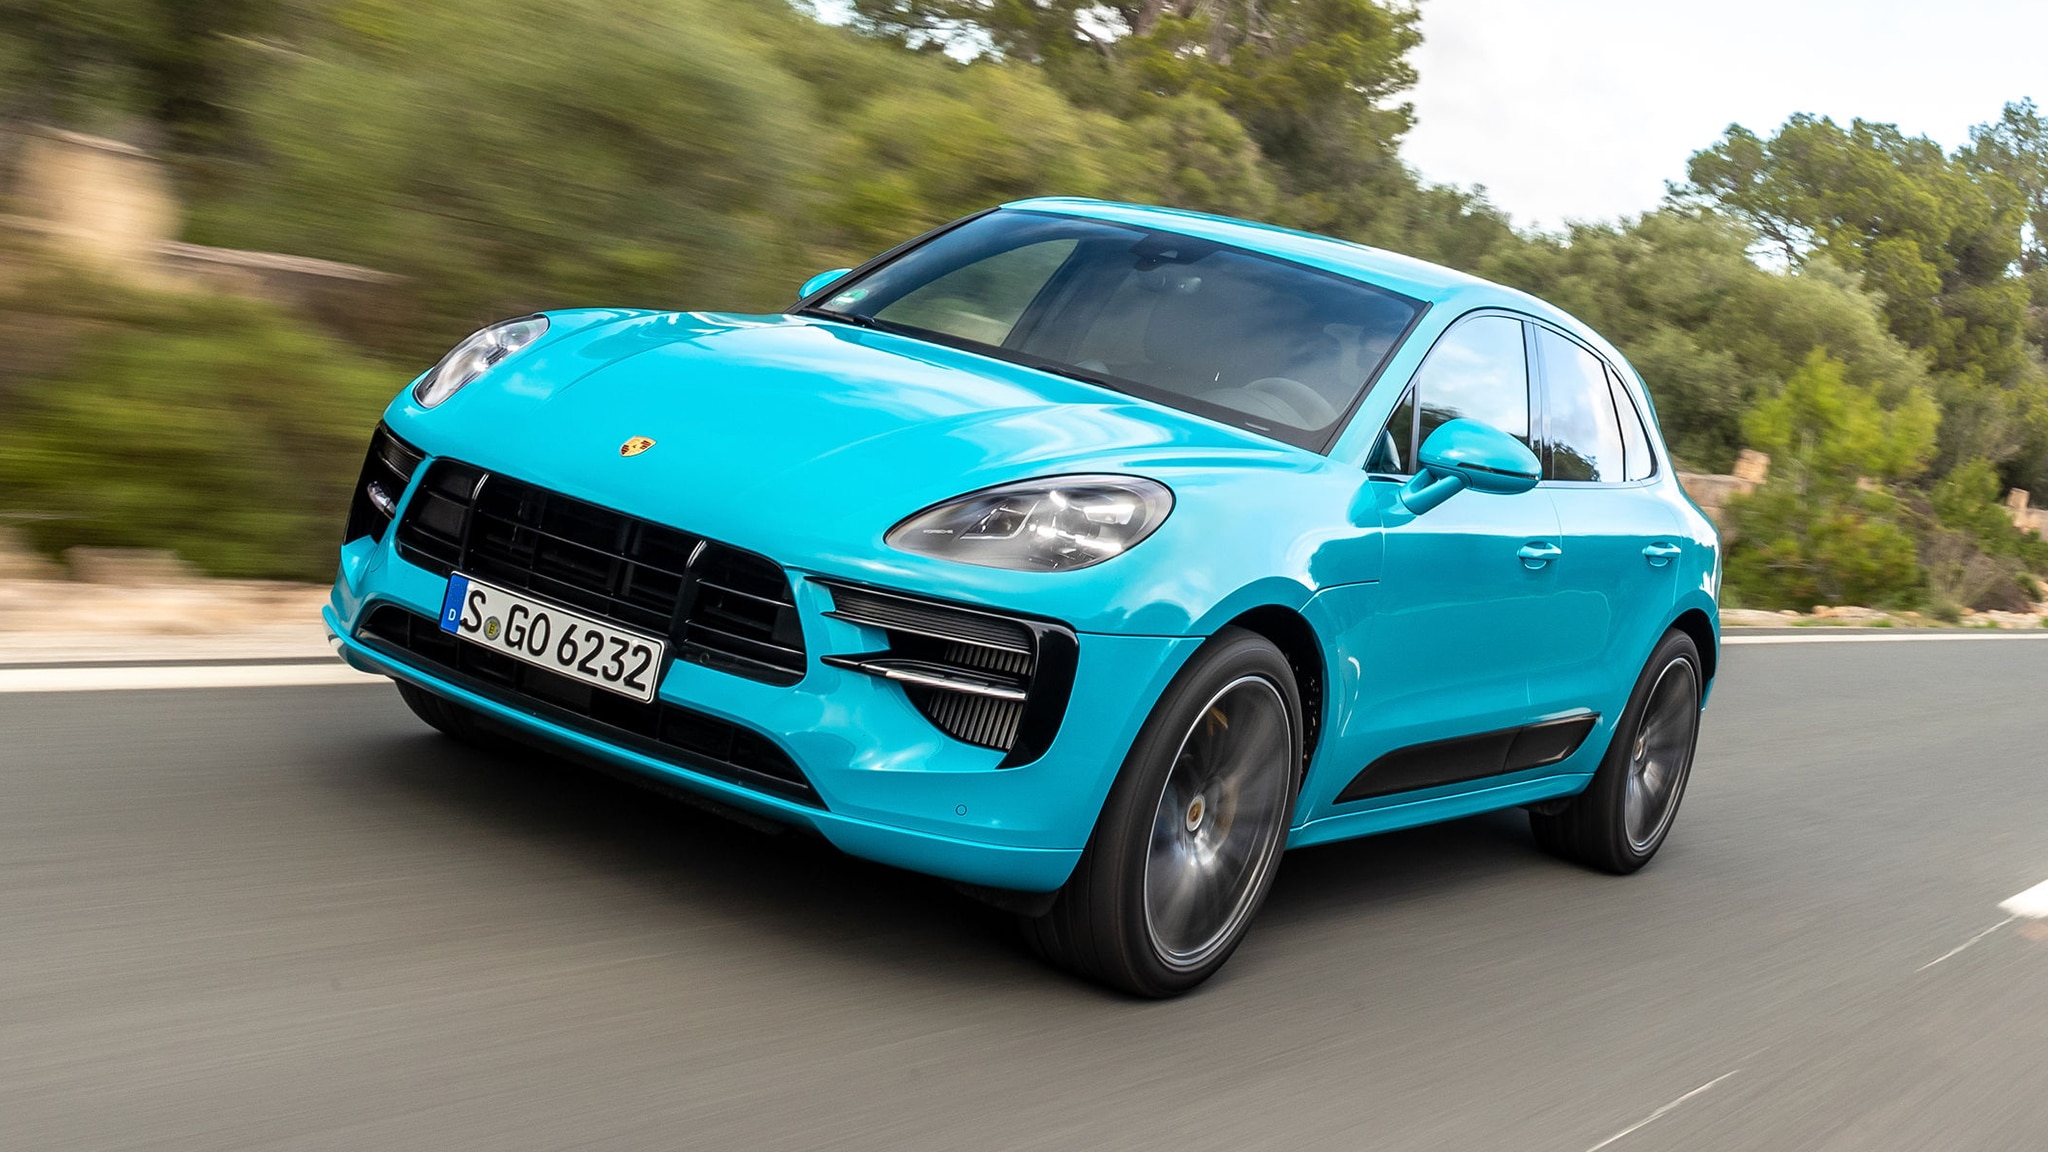 The Next Porsche Macan Will Be Fully Electric